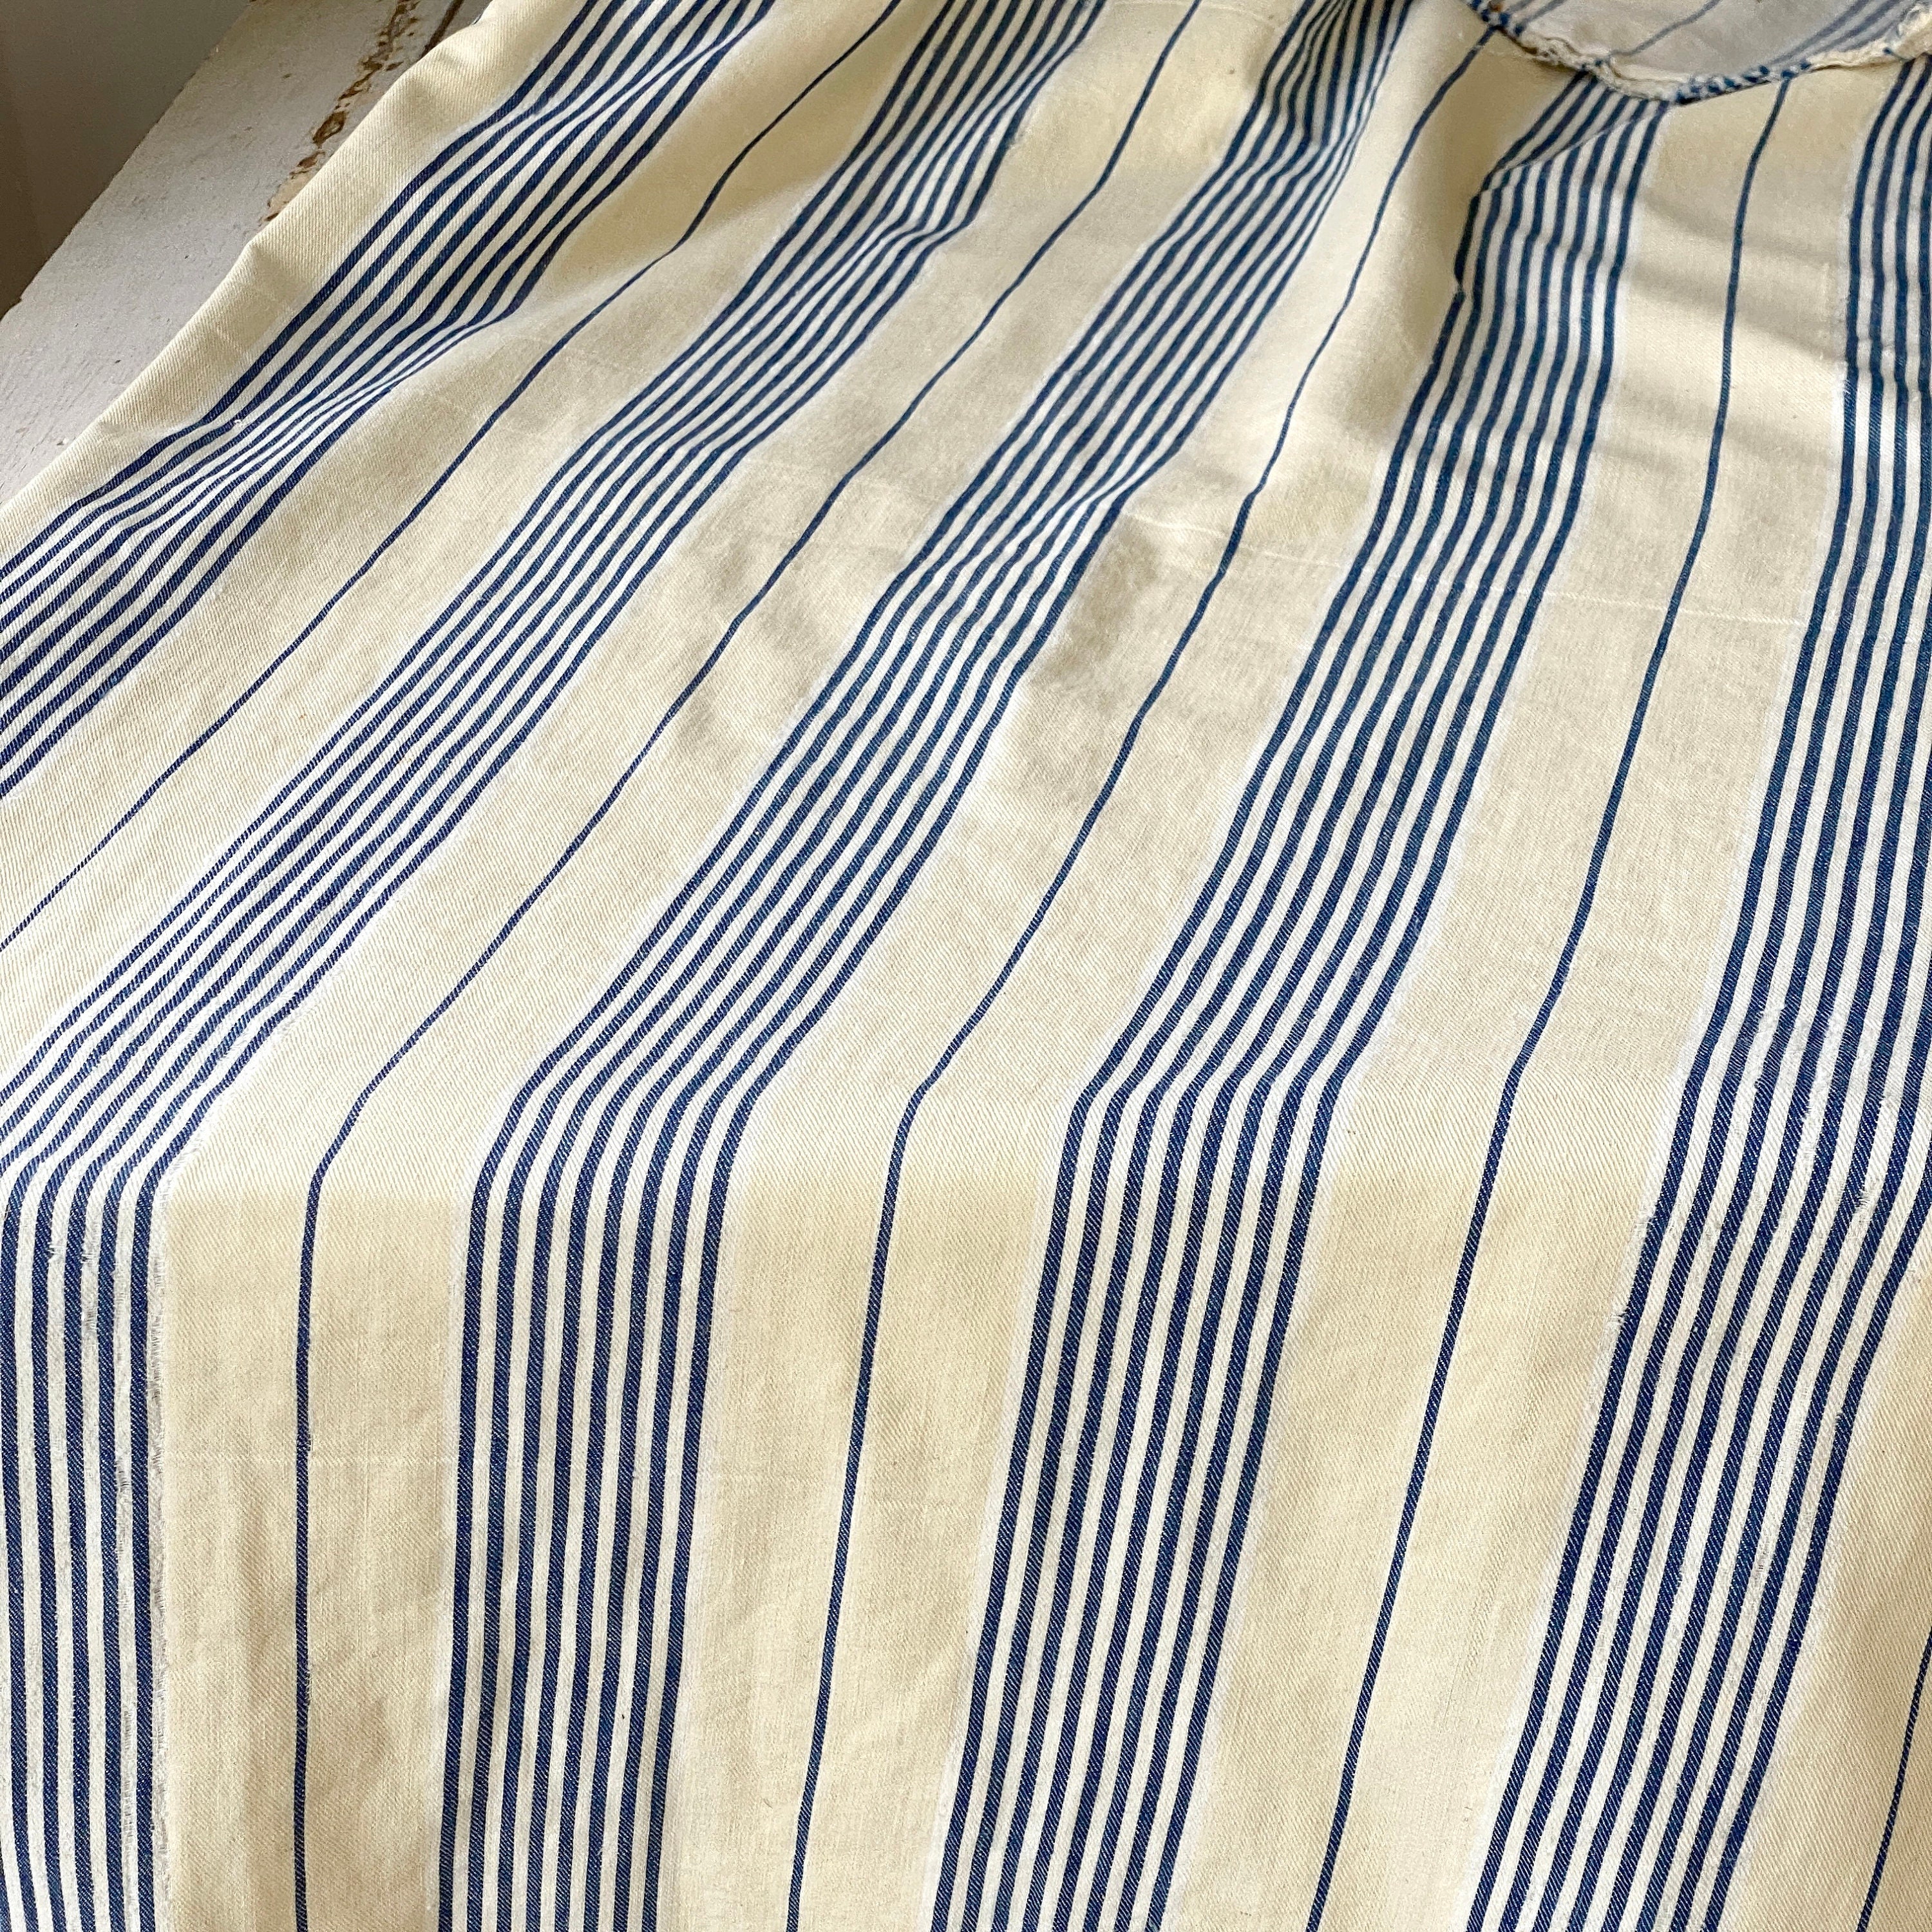 Antique Vintage Slate Blue & White Striped Cotton Ticking Fabric // 73x35 2  Avail Denim Blue 19th or Early 20th Century Mattress, Bed 